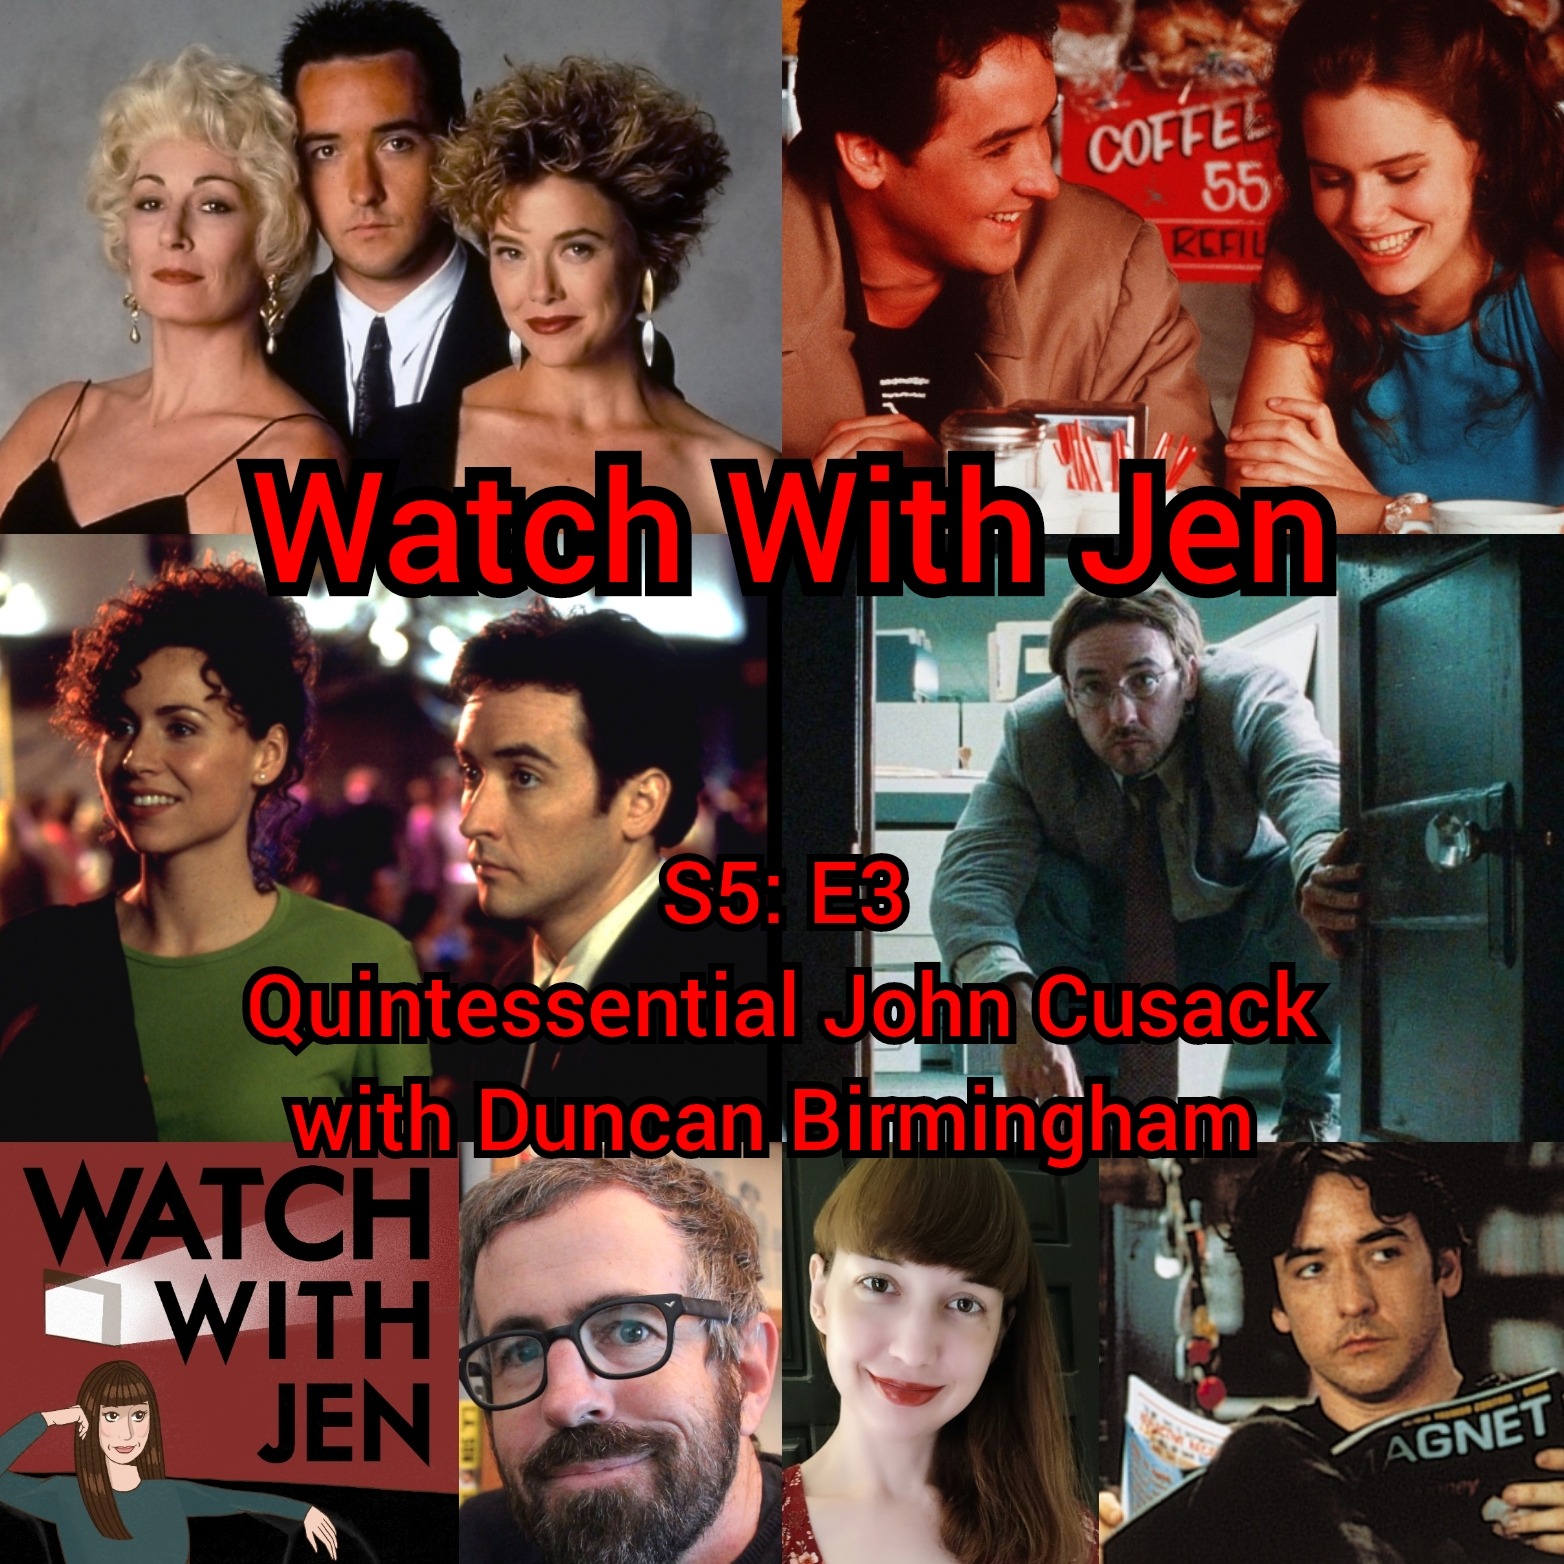 Watch With Jen - S5: E3 - Quintessential John Cusack with Duncan Birmingham